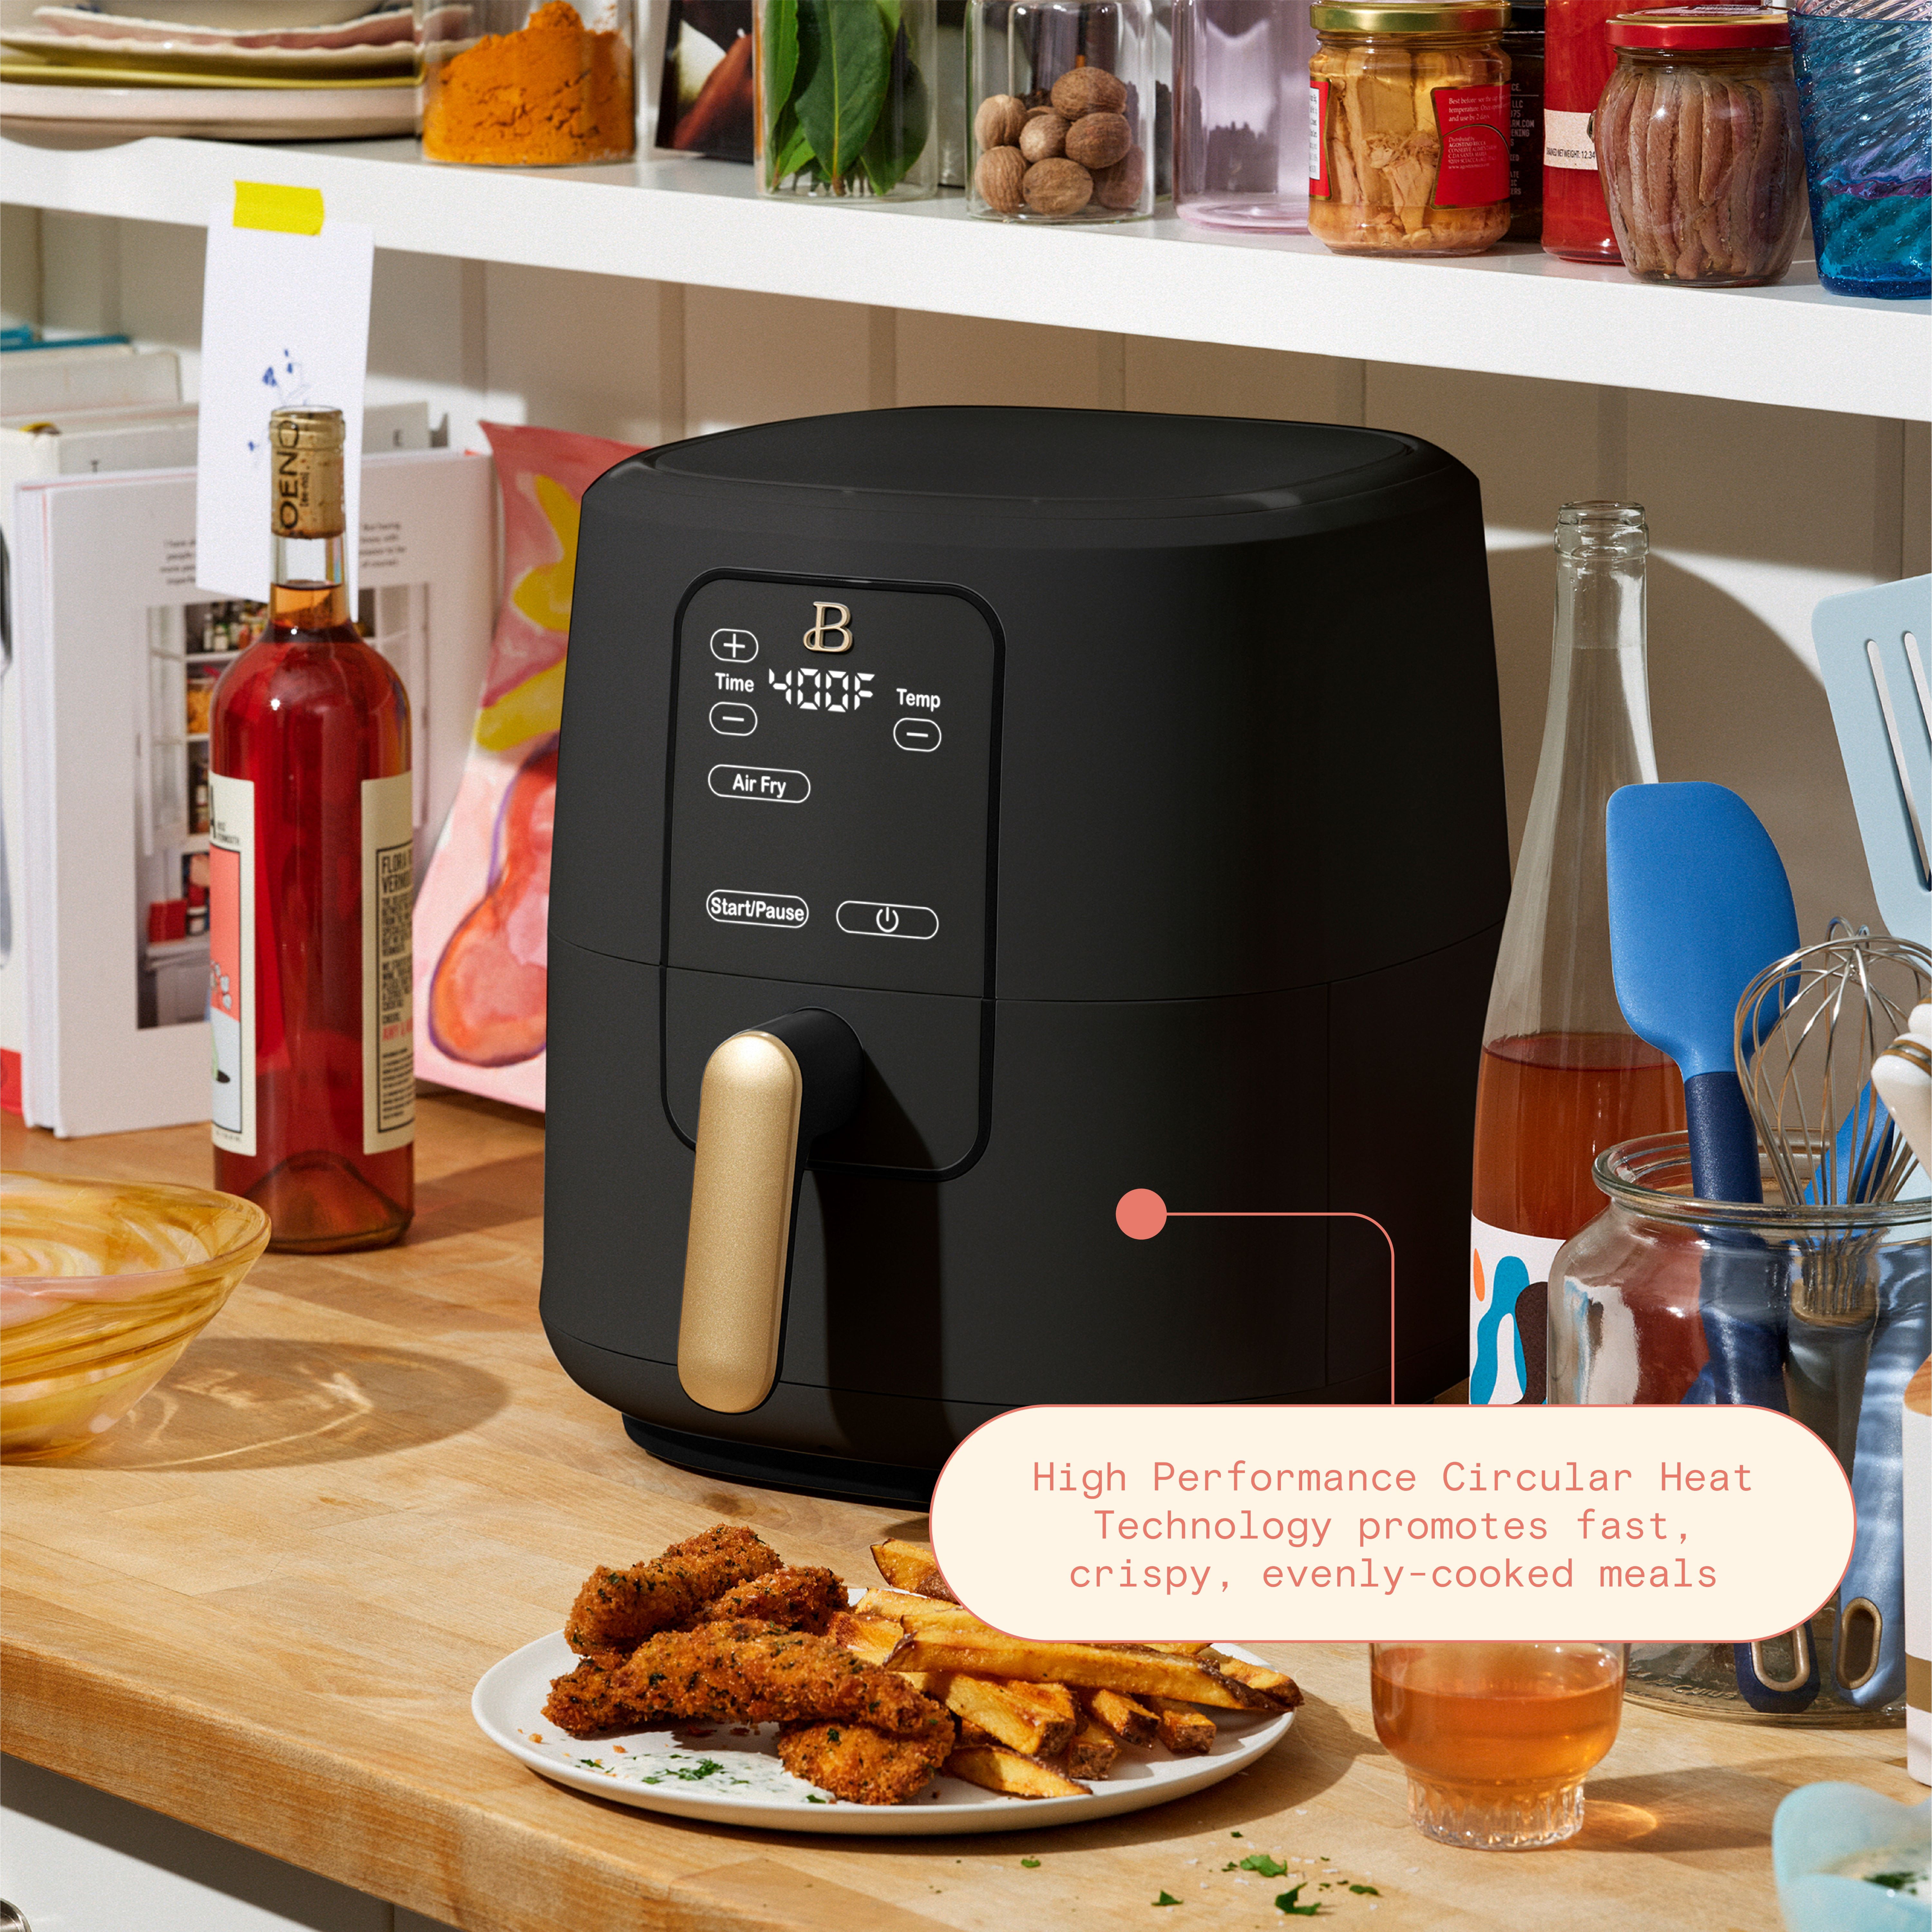 Air Fryer By Utopia Kitchen Product Review by VisualEyeCandy ReviewsJust4U!  